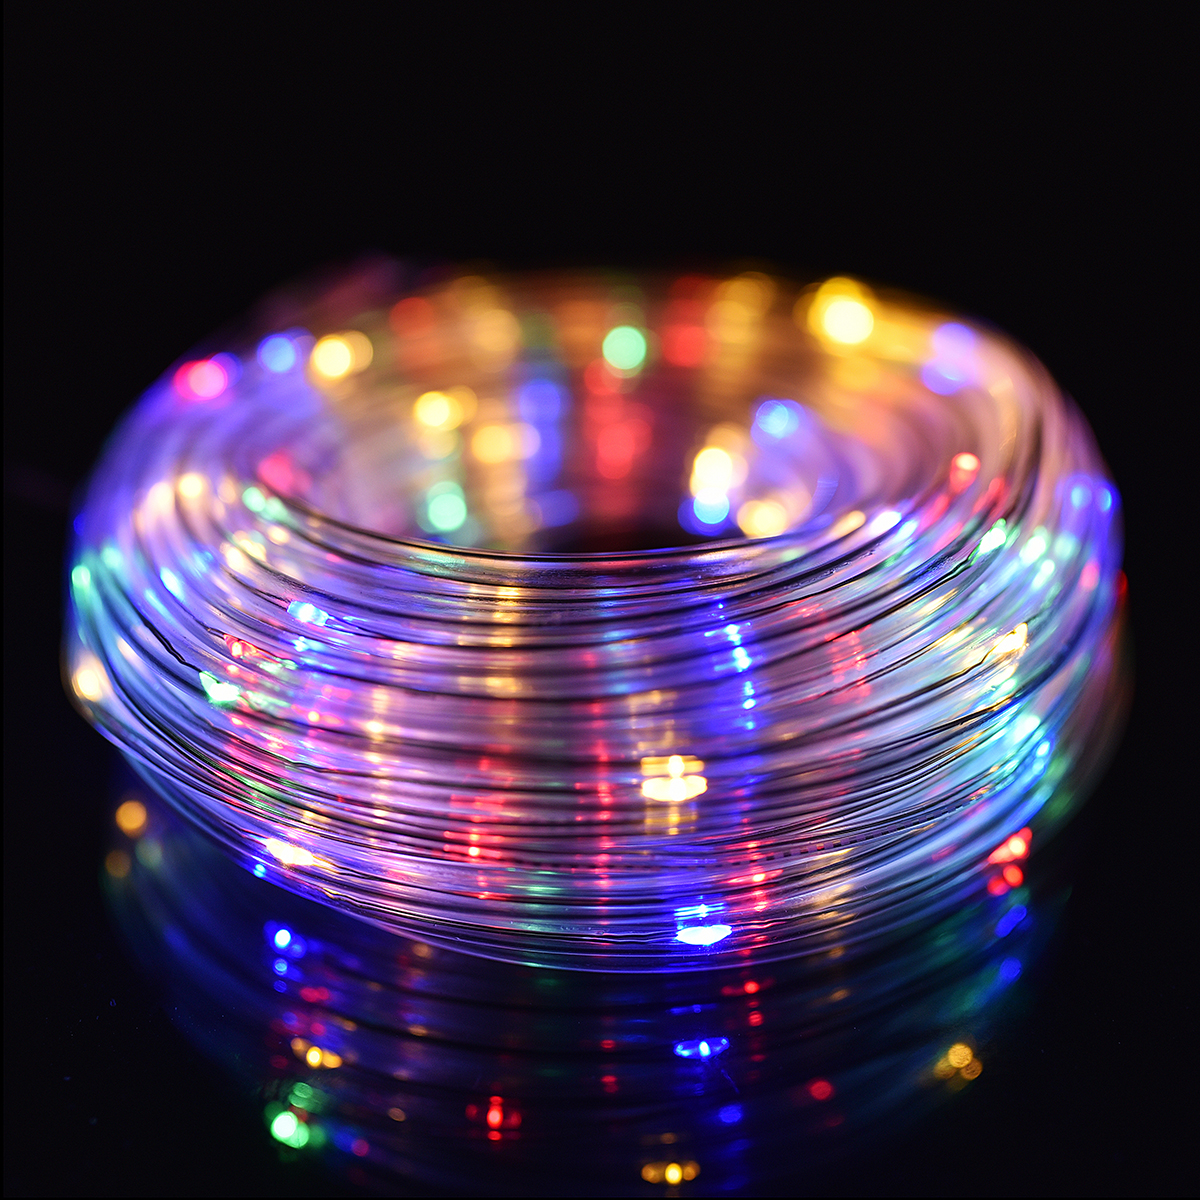 12M-Battery-Powered-120LED-String-Light-8-Modes-Remote-Control-Fairy-Lamp-Party-Christmas-Home-Decor-1351130-7